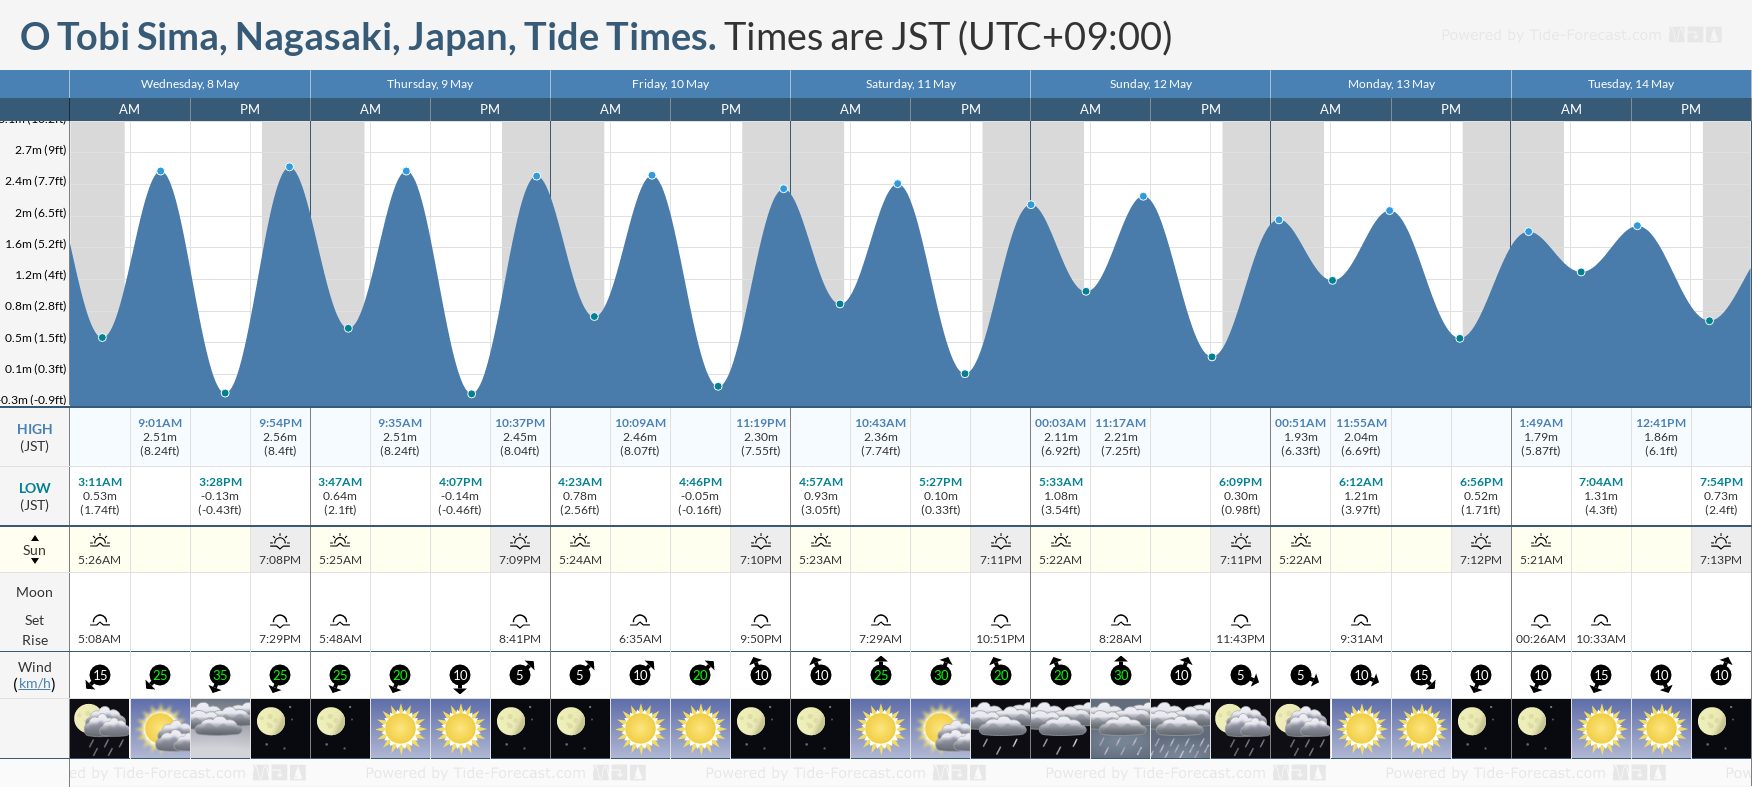 O Tobi Sima, Nagasaki, Japan Tide Chart including high and low tide times for the next 7 days